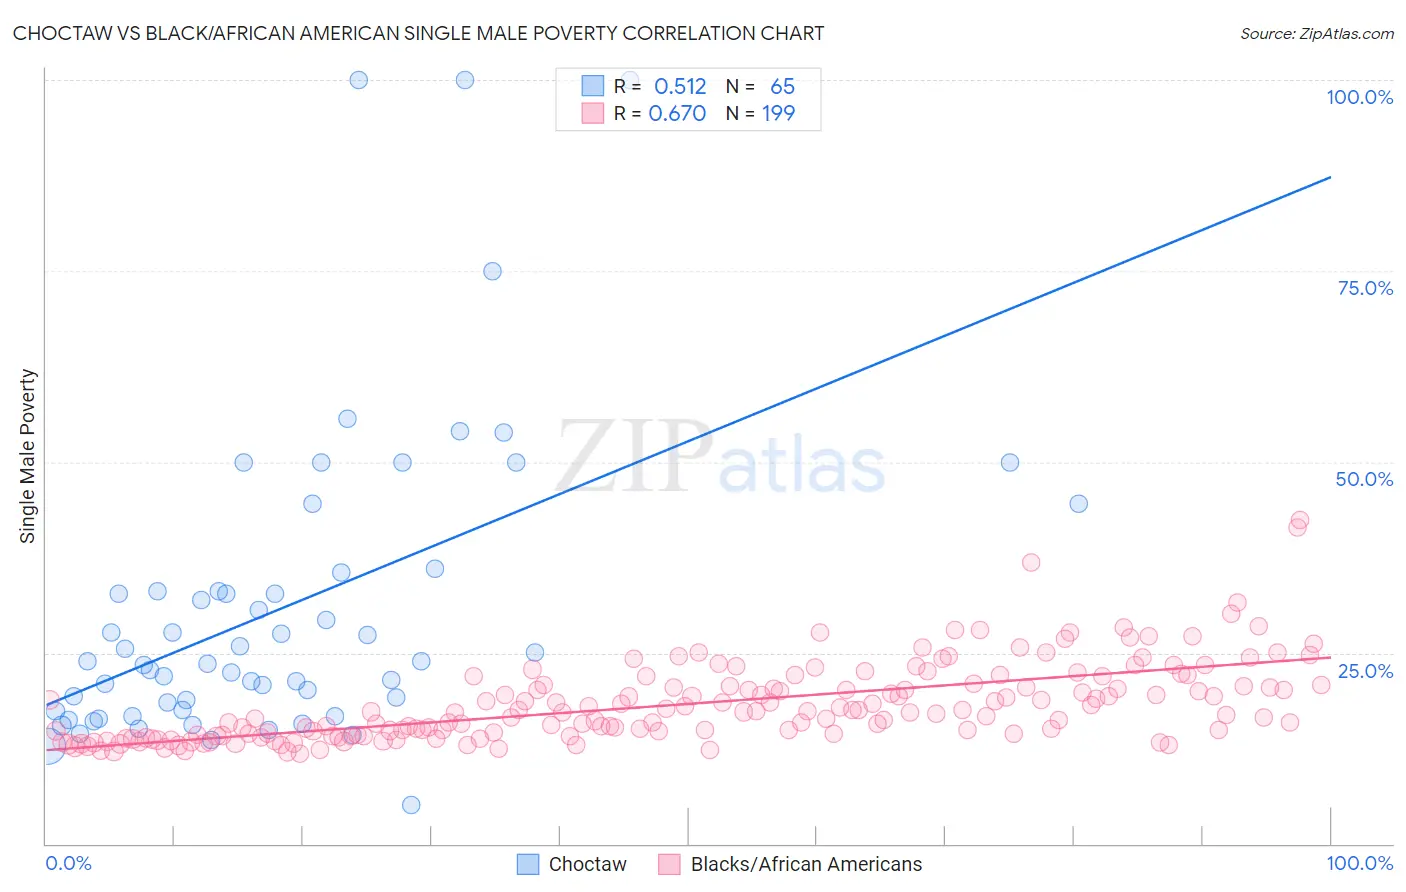 Choctaw vs Black/African American Single Male Poverty